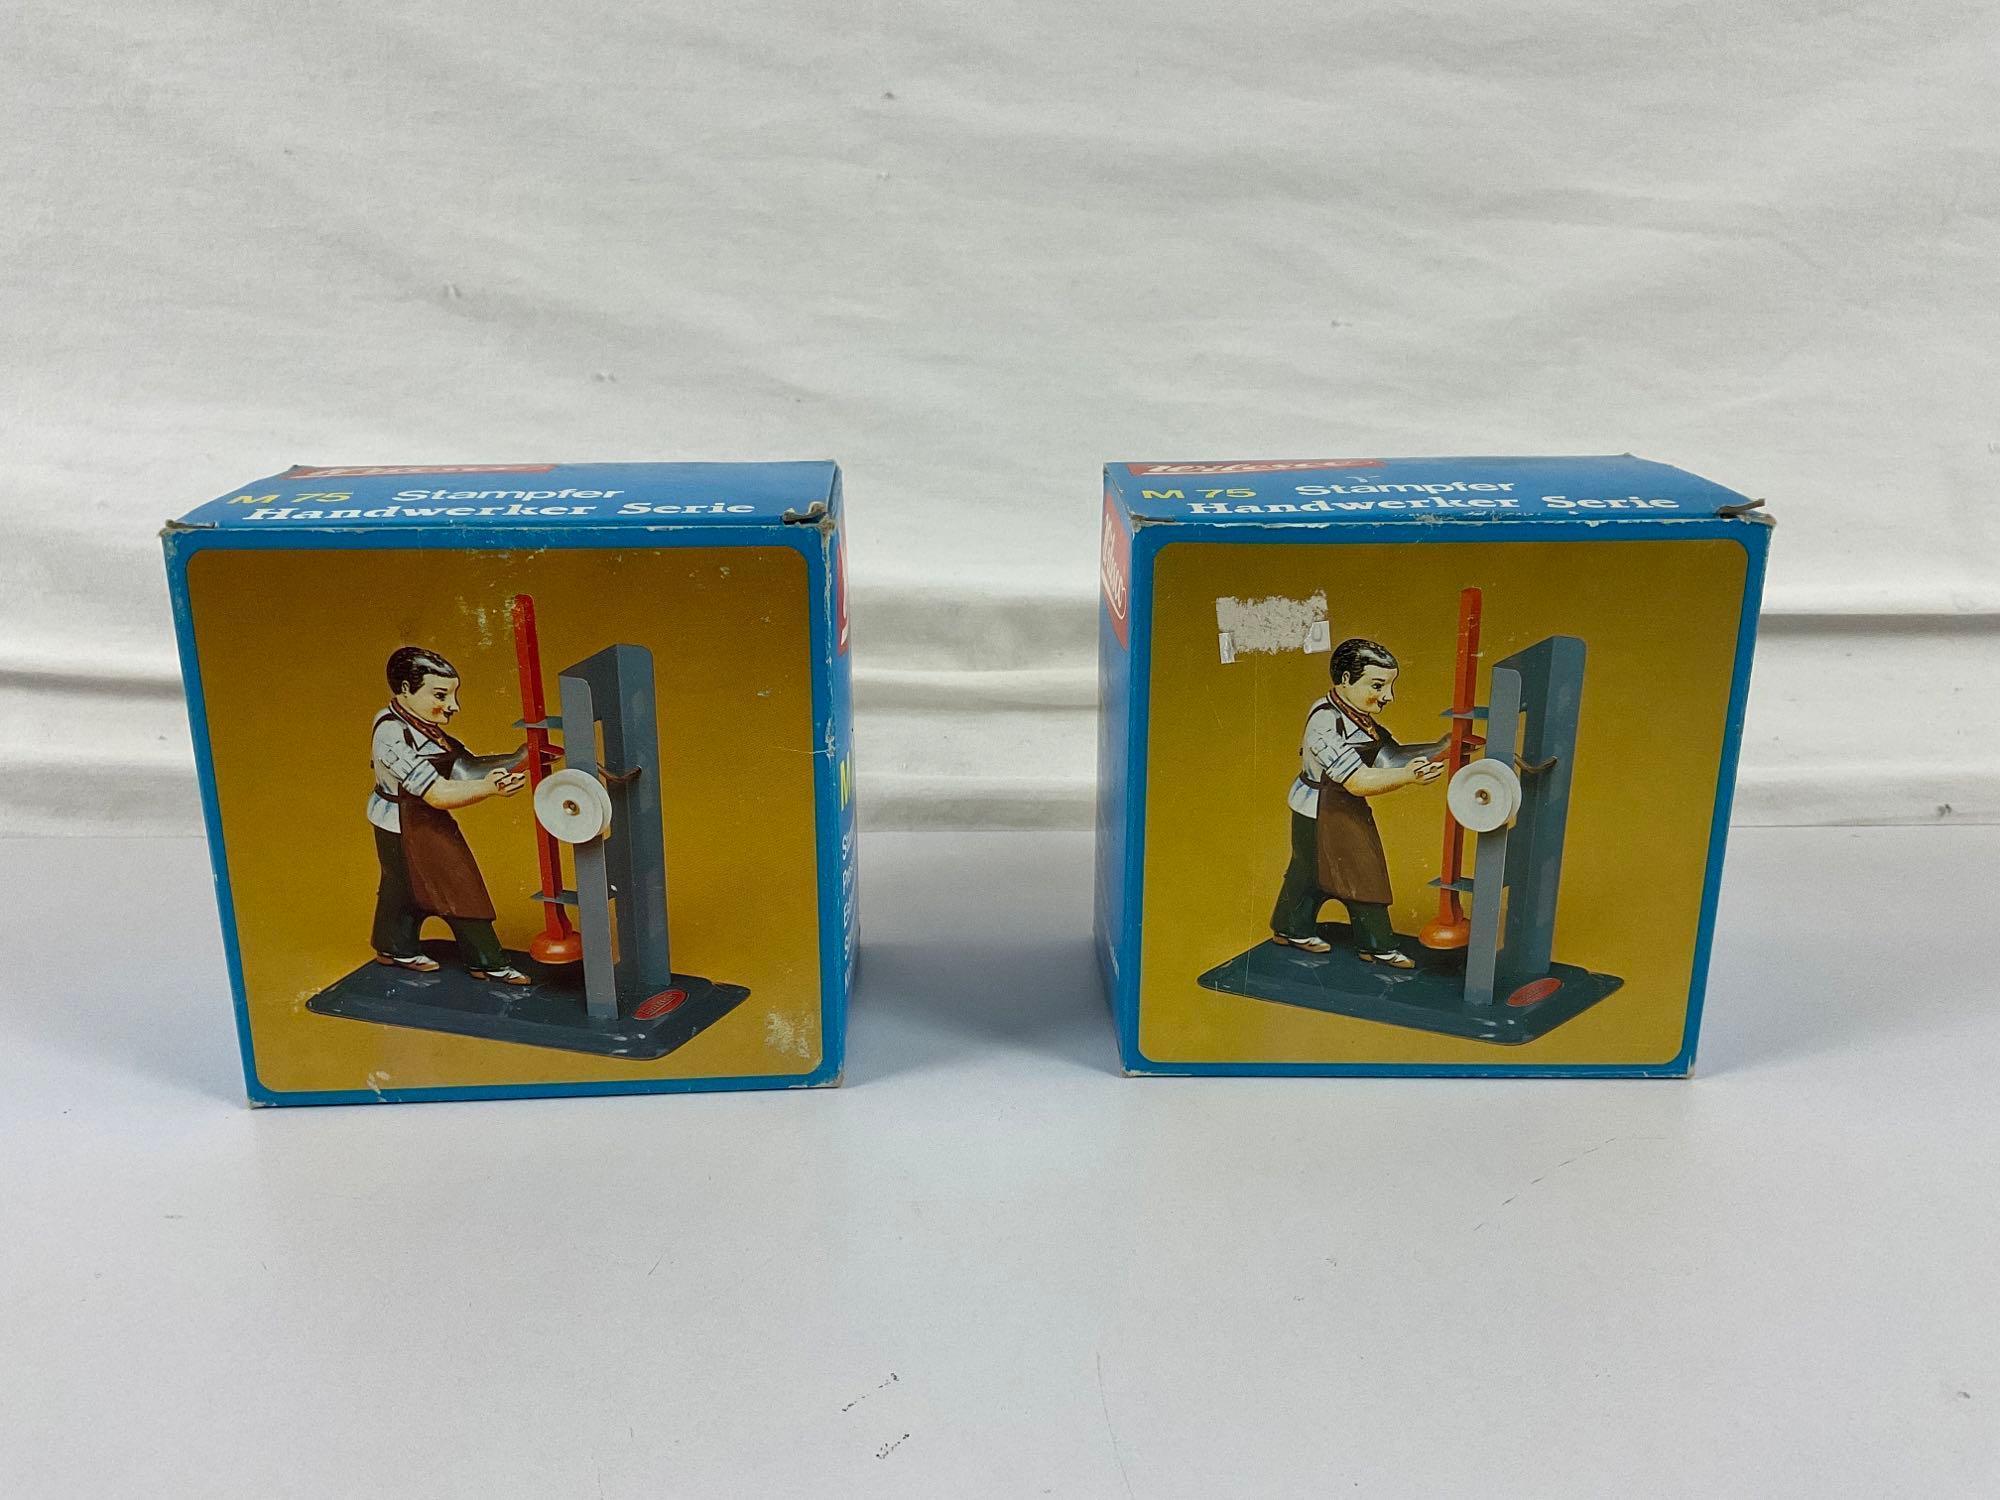 Collection of Wilesco Model Figures all in original boxes, 4ct